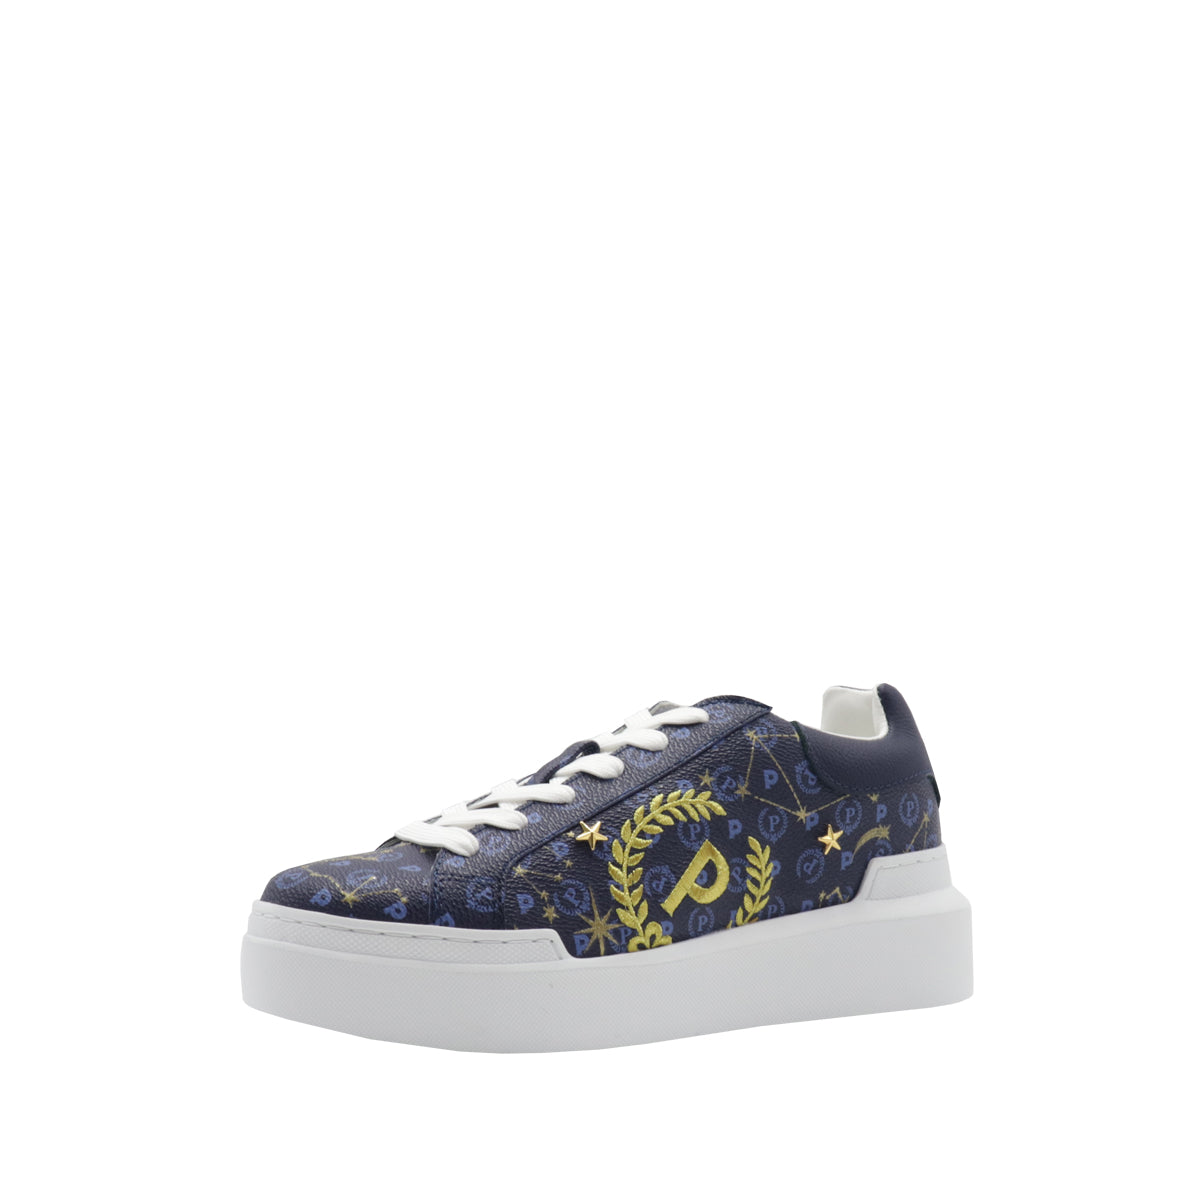 Pollini Women's Sneakers with Blue All Over Print and Gold Logo